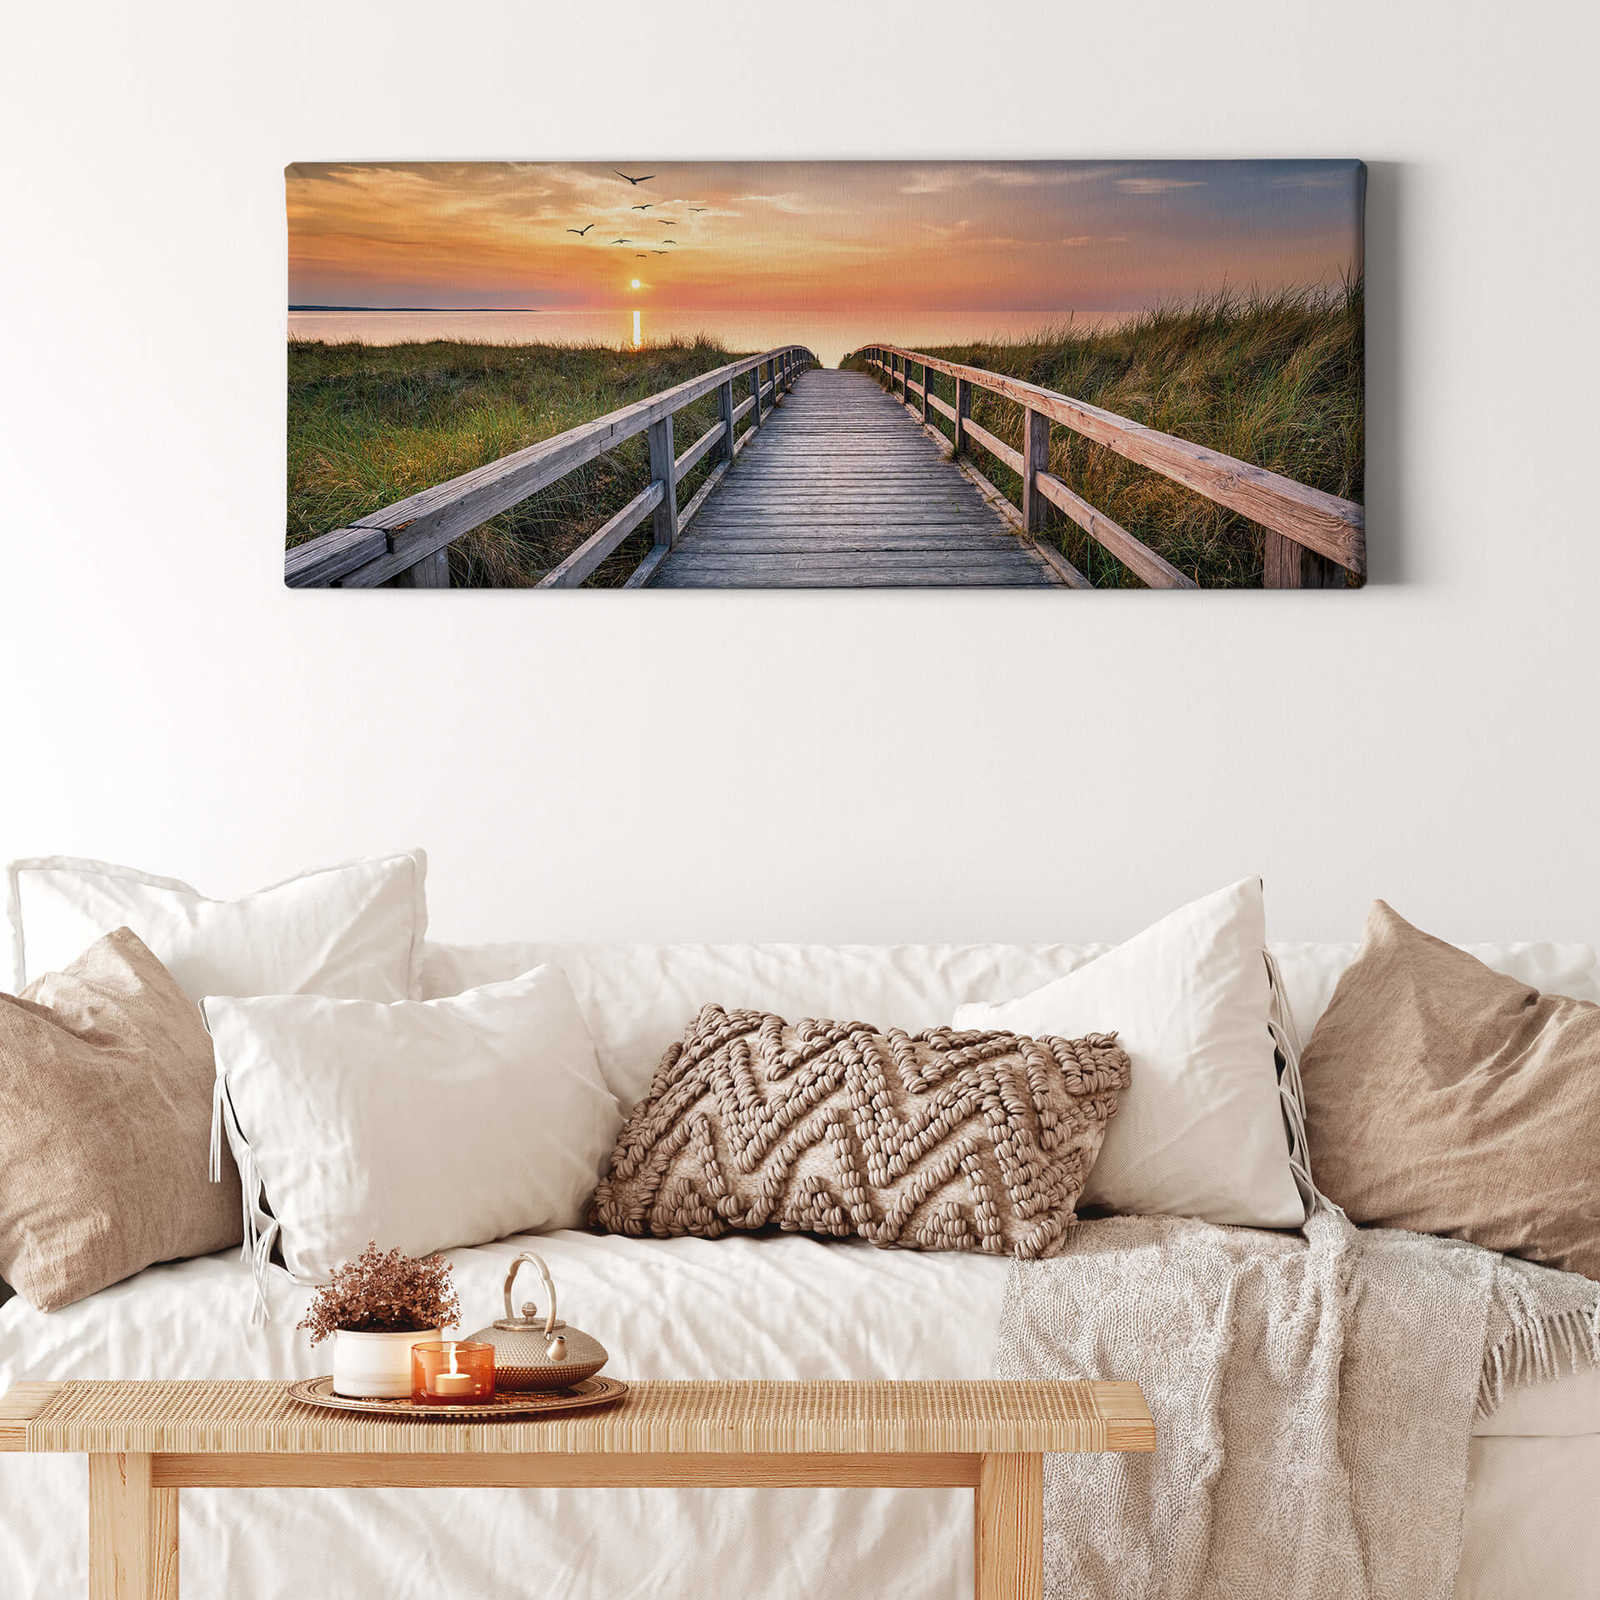             Panoramic canvas print of North Sea dunes at sunset
        